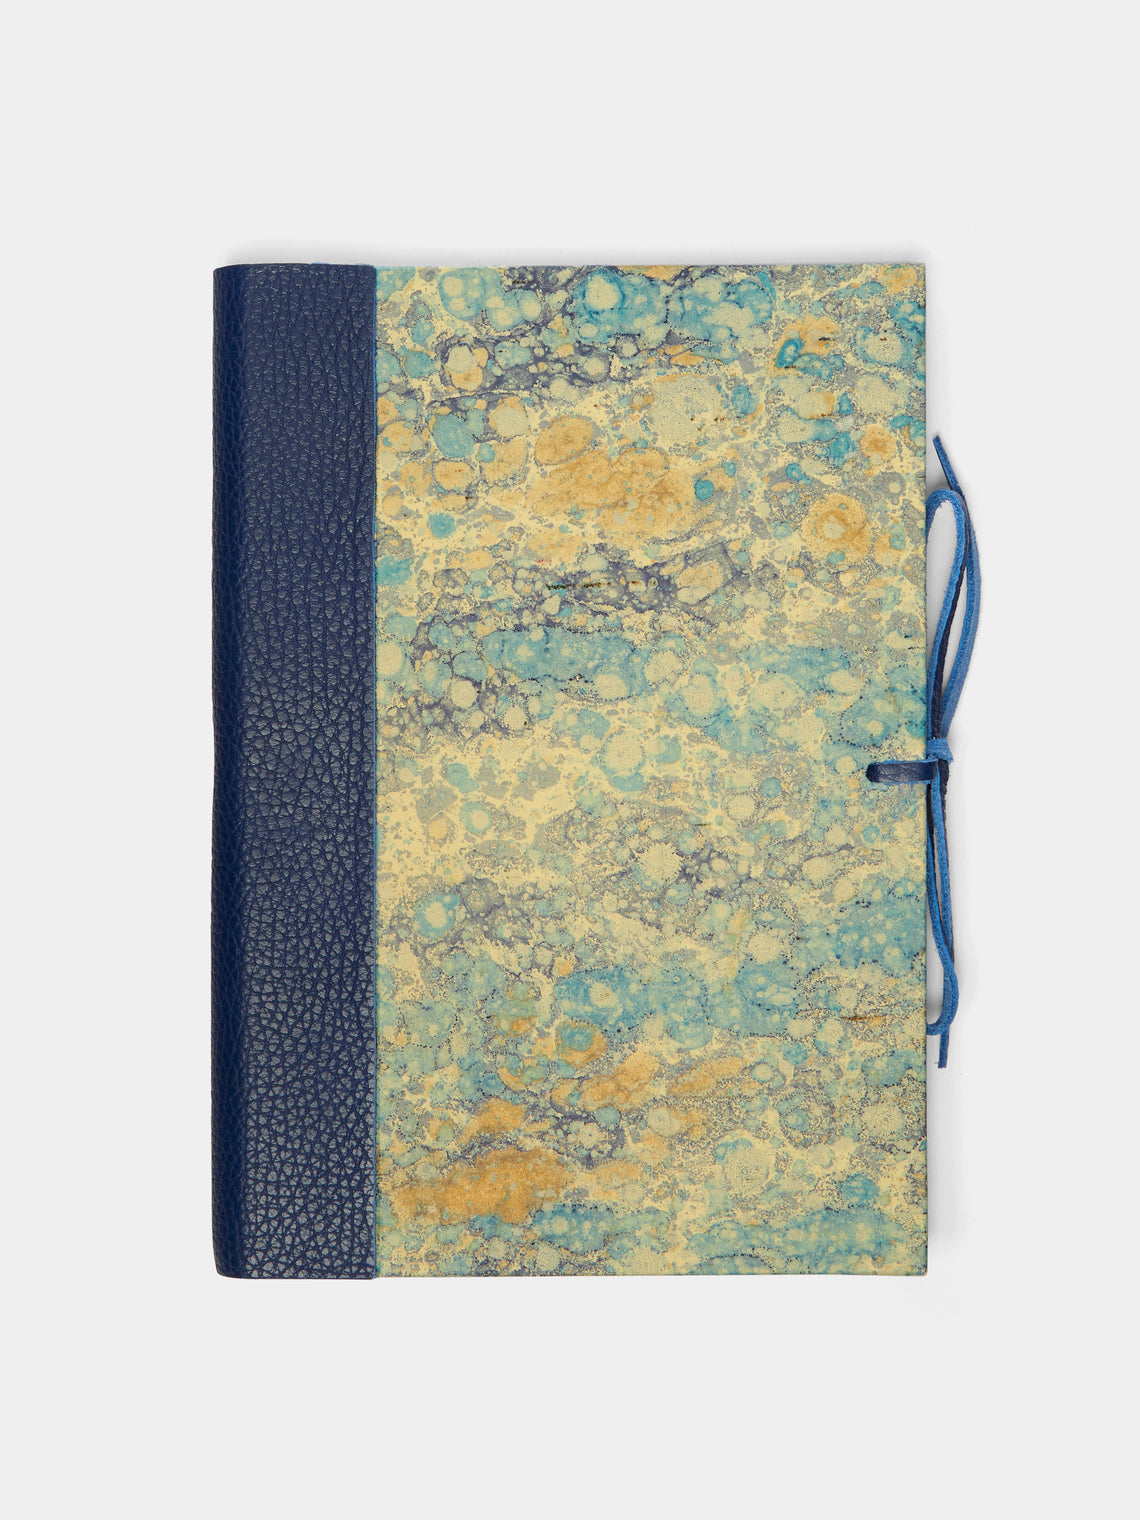 Giannini Firenze - Hand-Marbled Leather Bound Notebook - Blue - ABASK - 